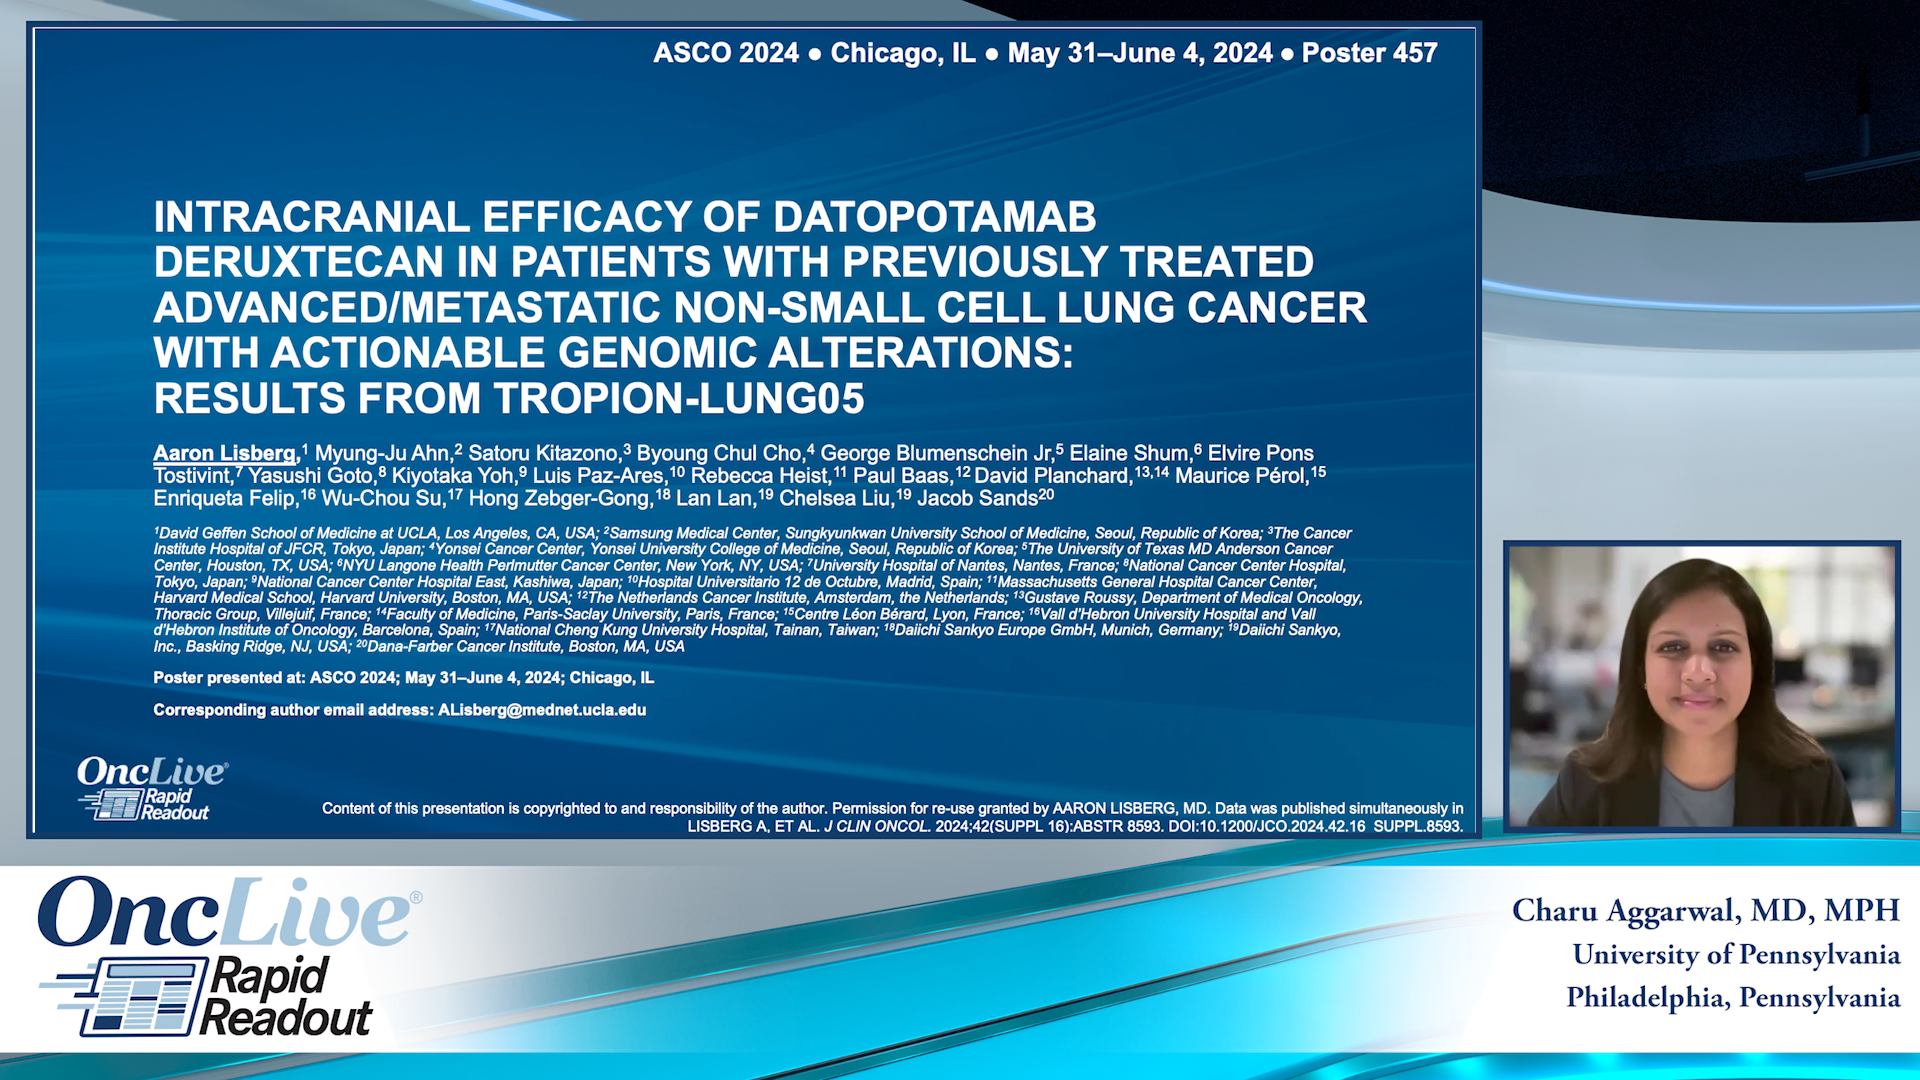 Intracranial Efficacy of Datopotamab Deruxtecan in Patients with Previously Treated Advanced/Metastatic Non-Small Cell Lung Cancer with Actionable Genomic Alterations: Results from Tropion-Lung05